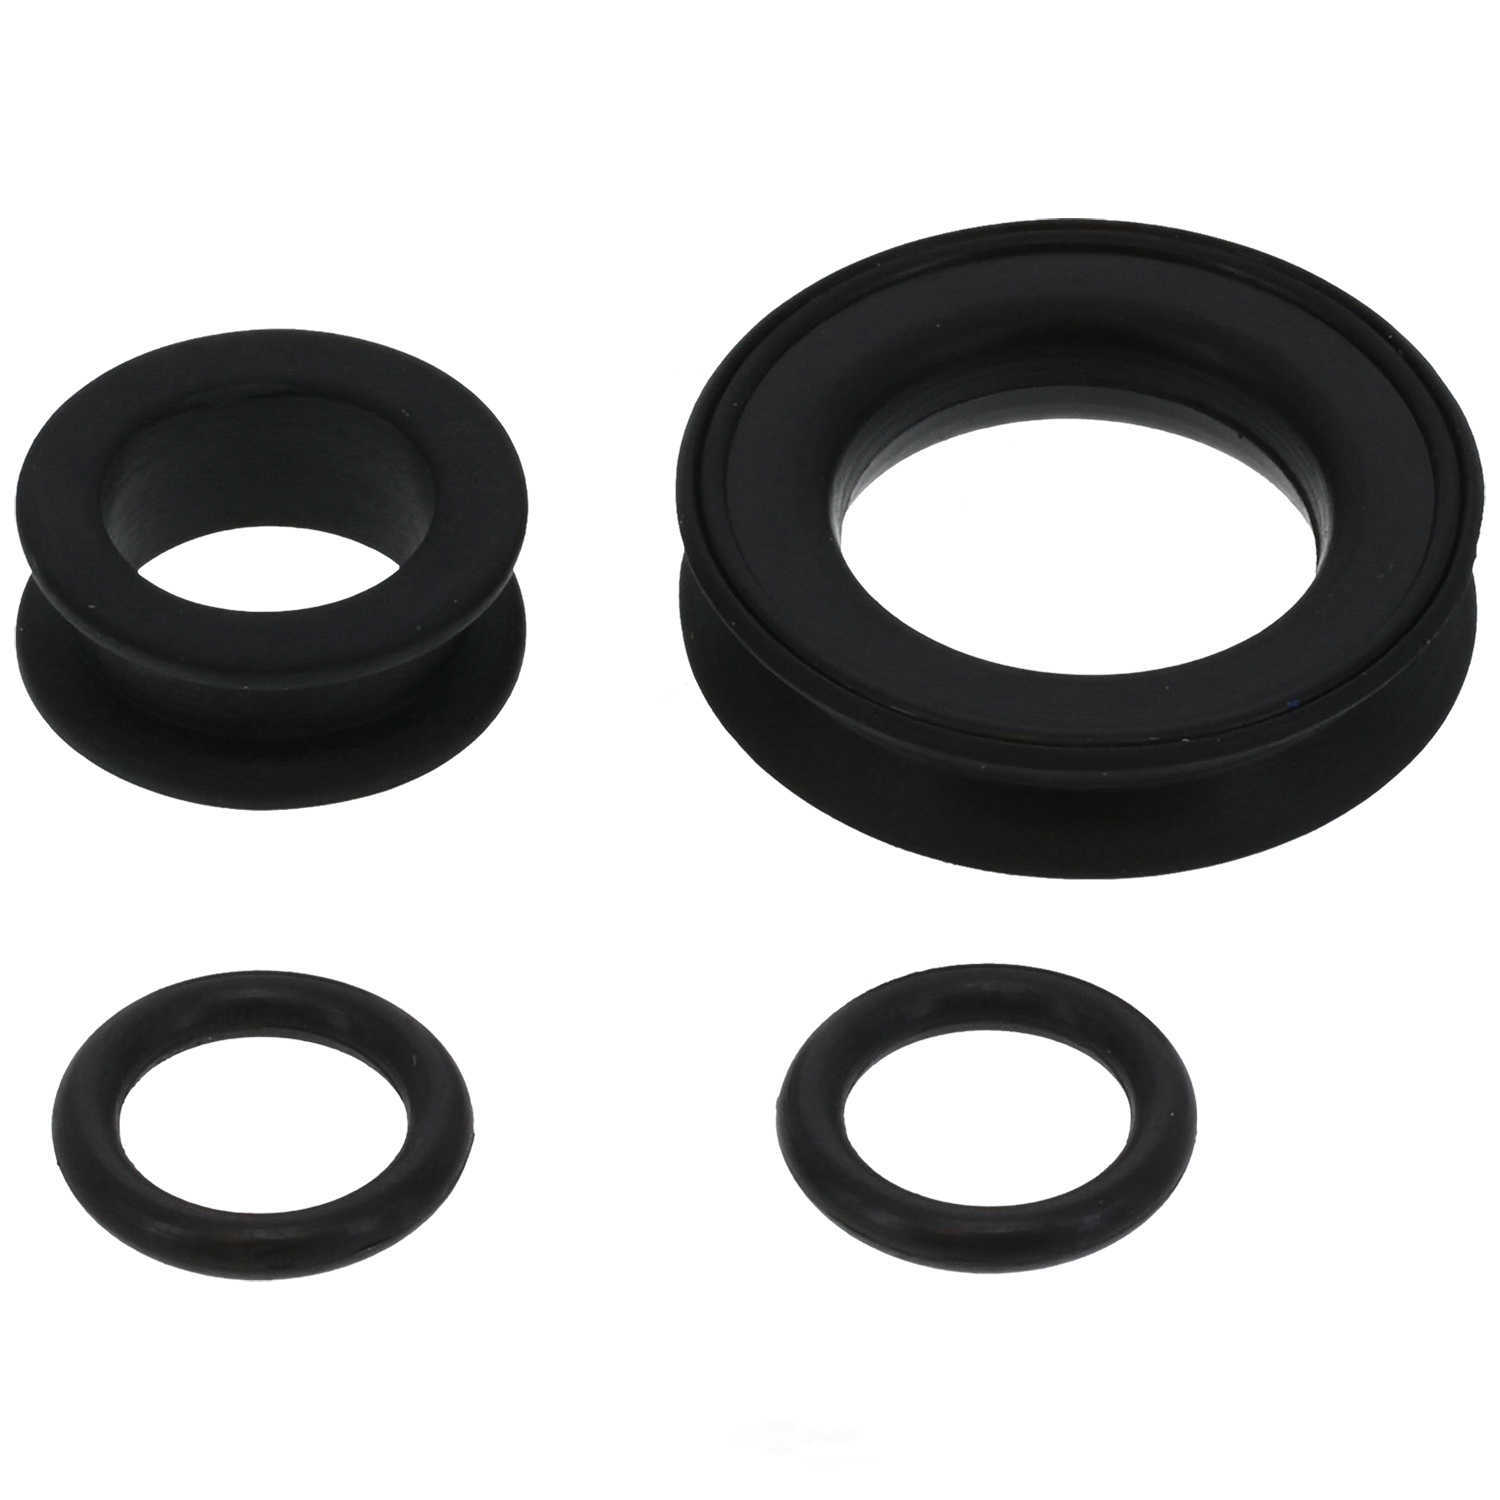 GB REMANUFACTURING INC. - Fuel Injector Seal Kit - GBR 8-037